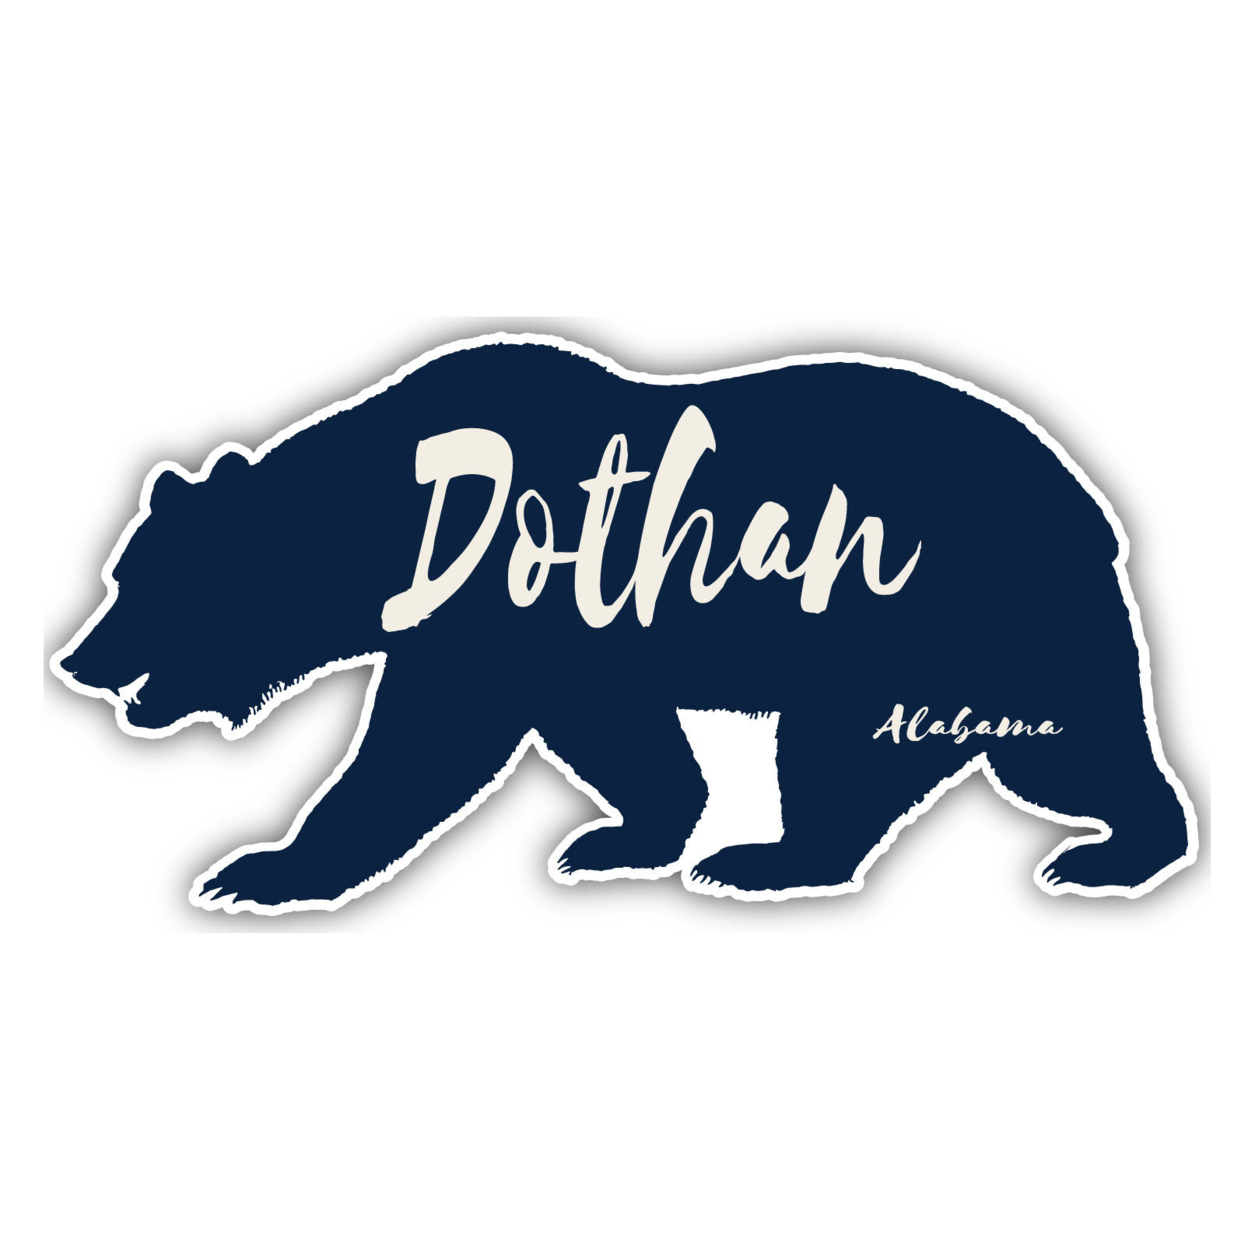 Dothan Alabama Souvenir Decorative Stickers (Choose Theme And Size) - 4-Pack, 12-Inch, Camp Life